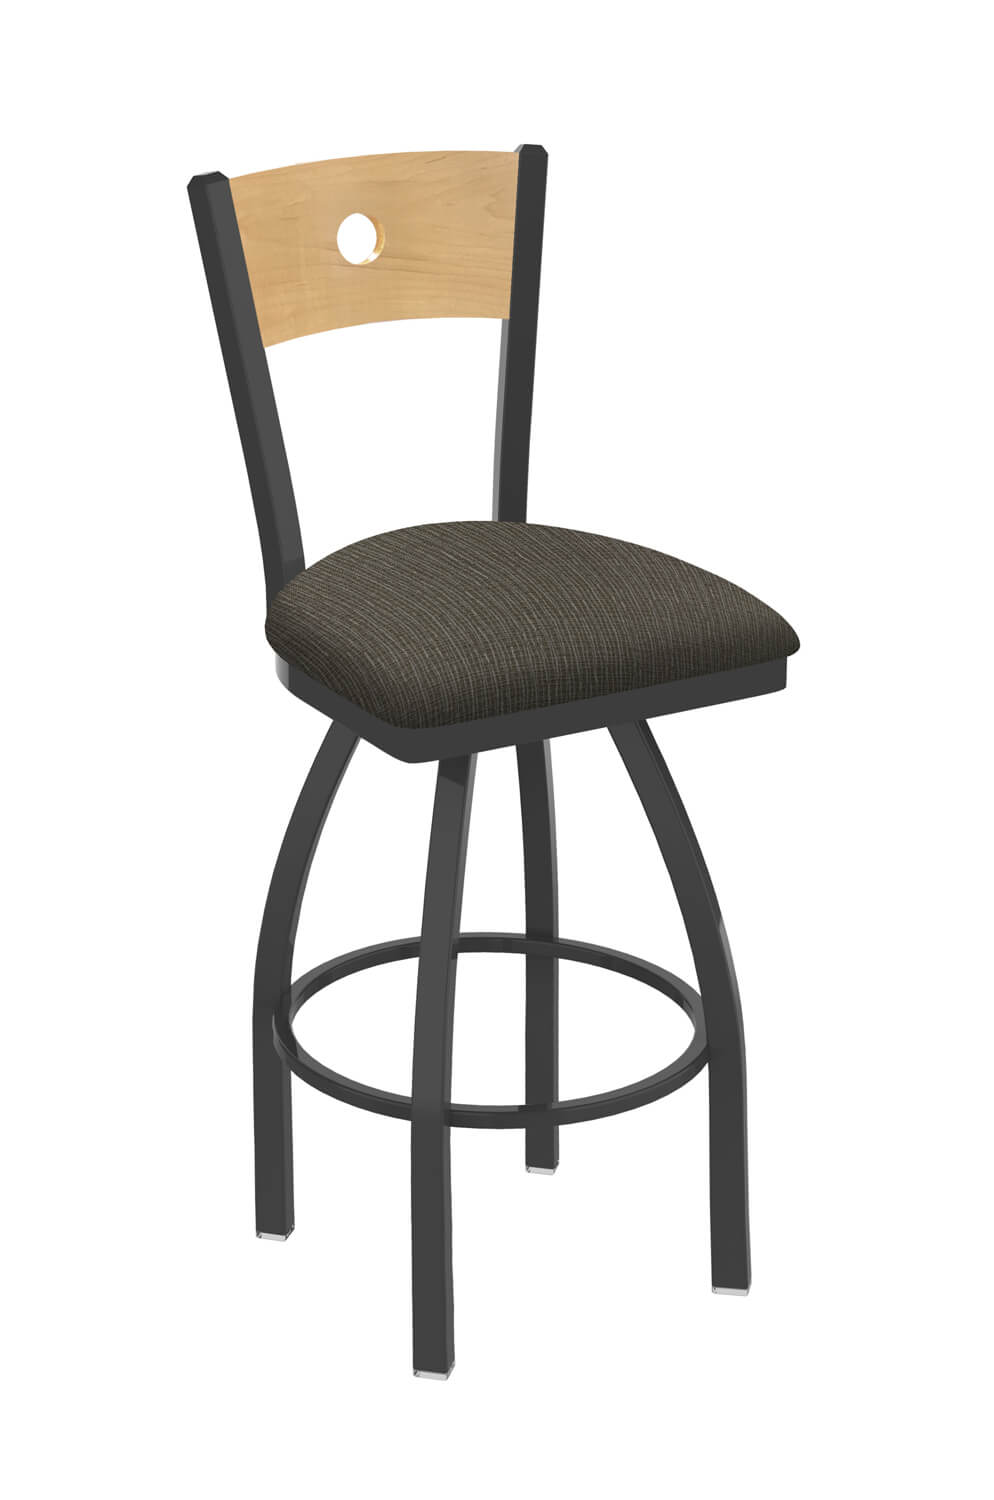 L038-25 Black Wrinkle Buffalo Sabres Swivel Bar Stool with Laser Engraved Back by The Holland Bar Stool Co